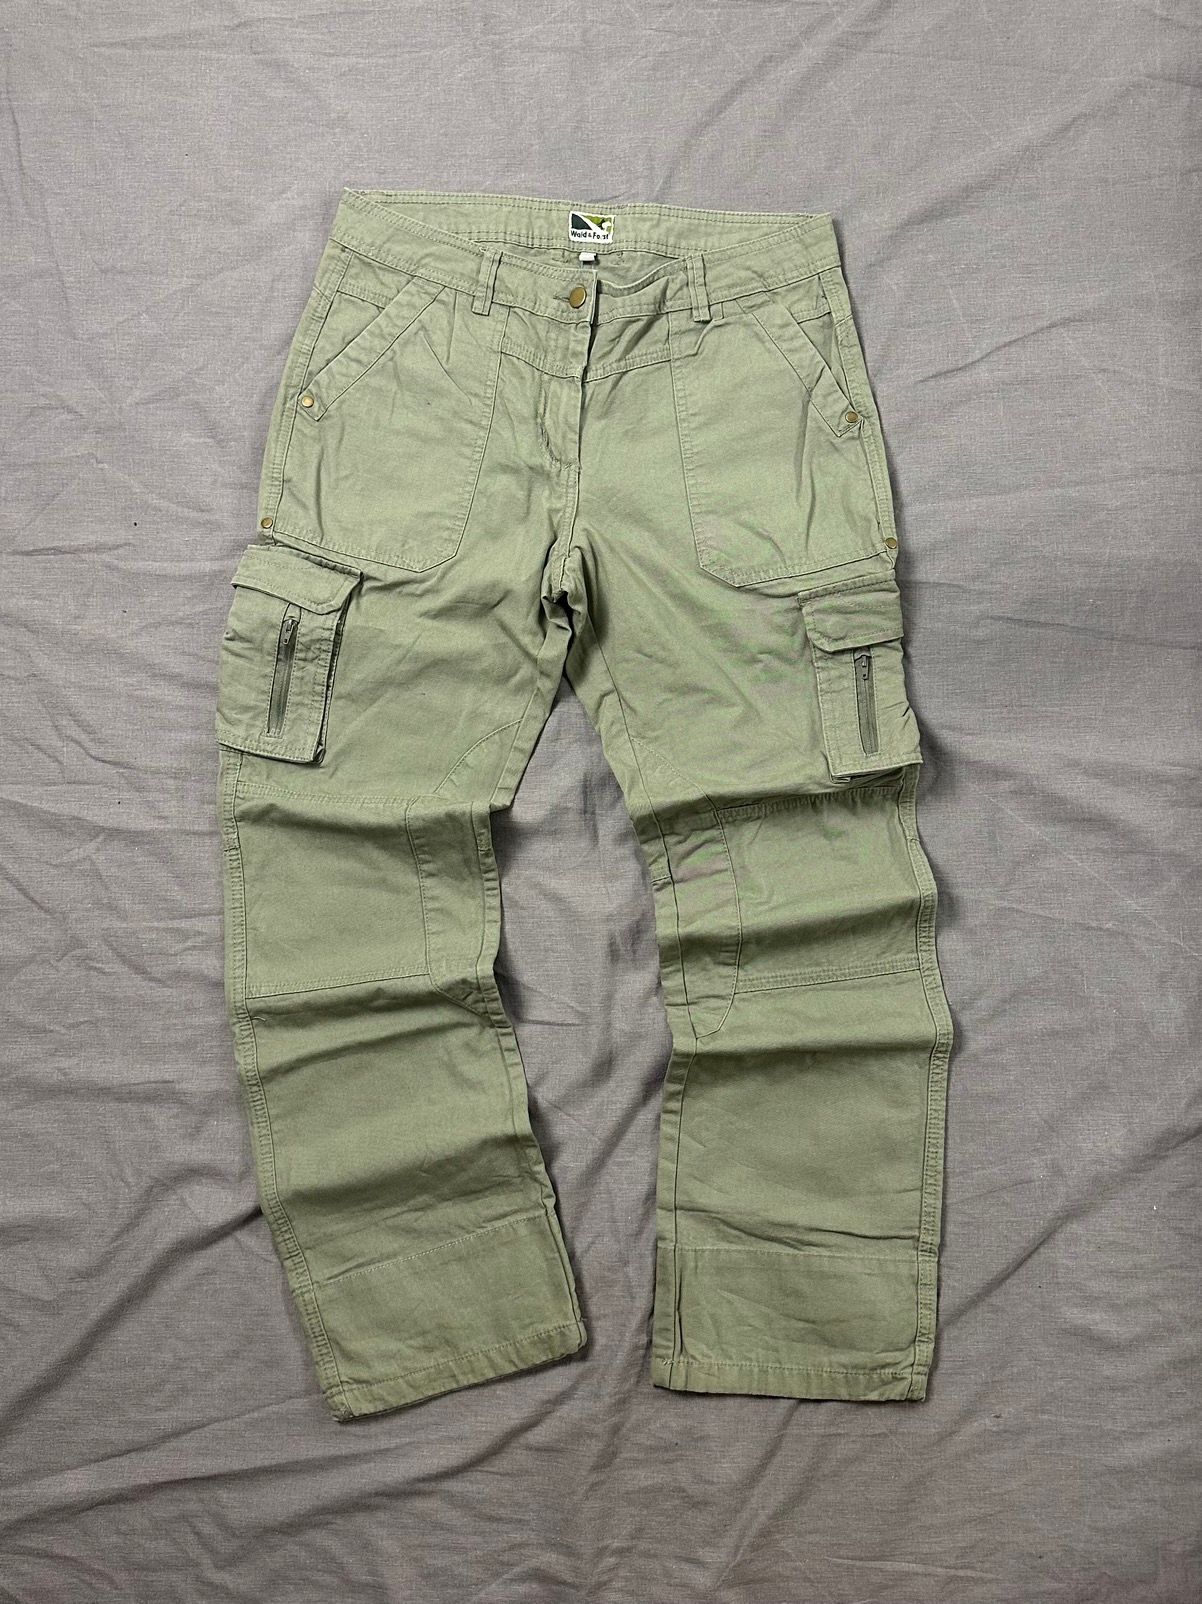 Pre-owned If Six Was Nine X Le Grande Bleu L G B Vintage Cargo Japanese Military Green Faded Pants Lgb Style (size 31)